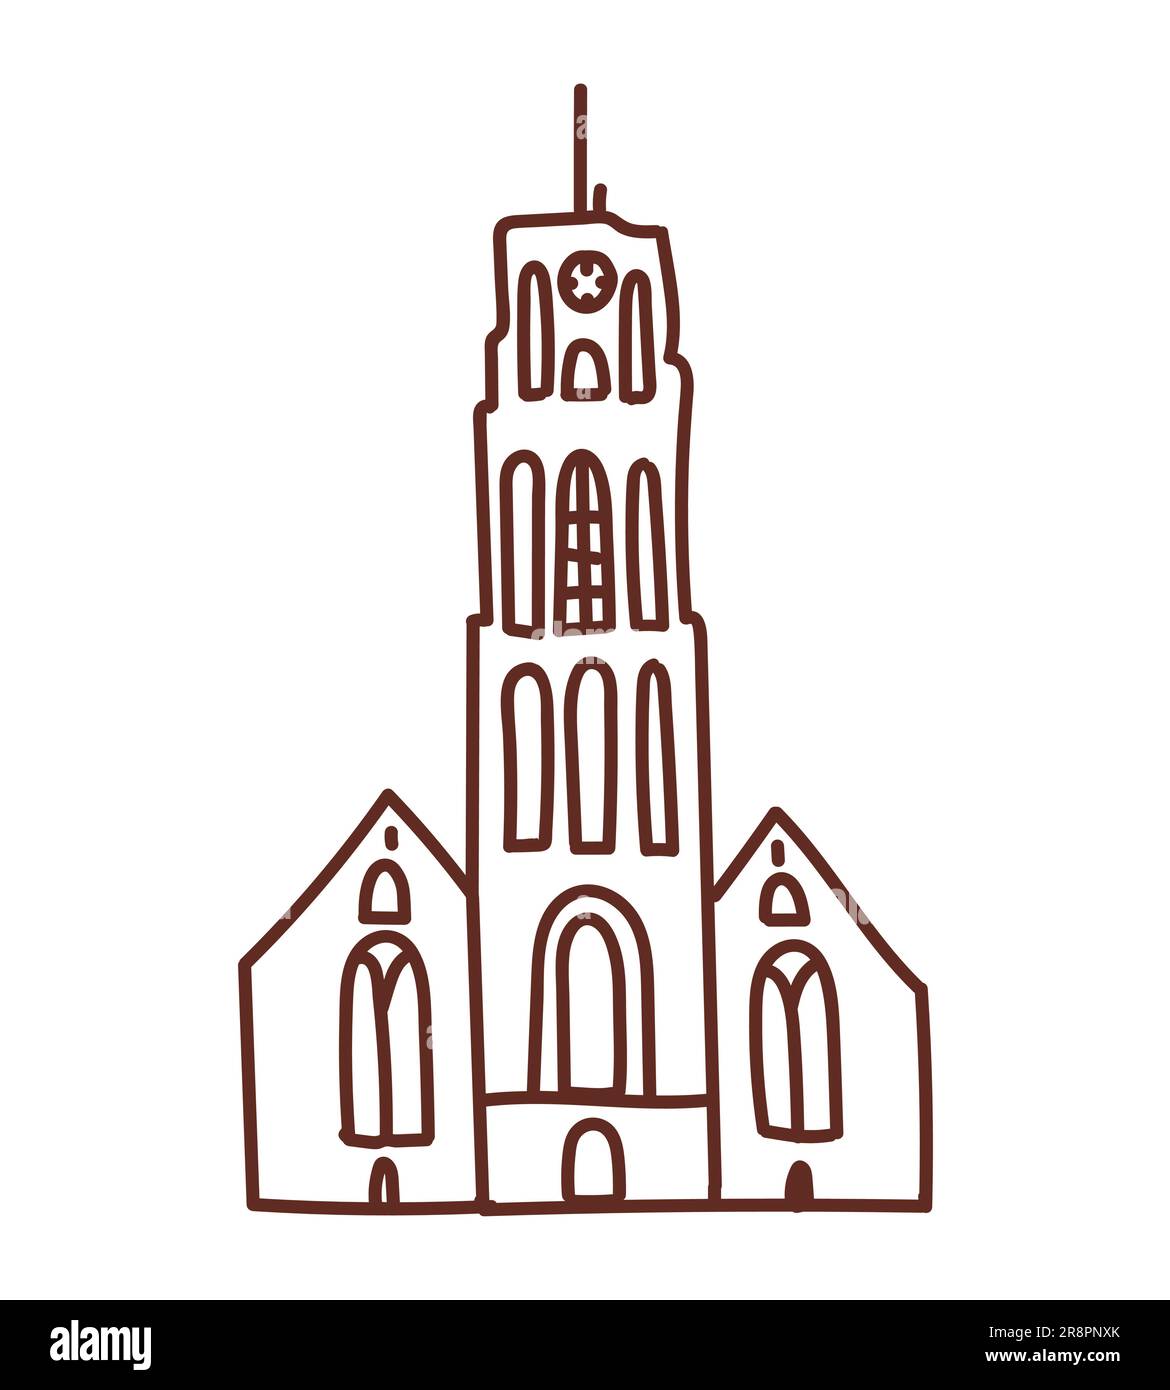 Hand drawn doodle church with a steeple and clock on the wall. Simple childish drawing isolated on white Stock Vector